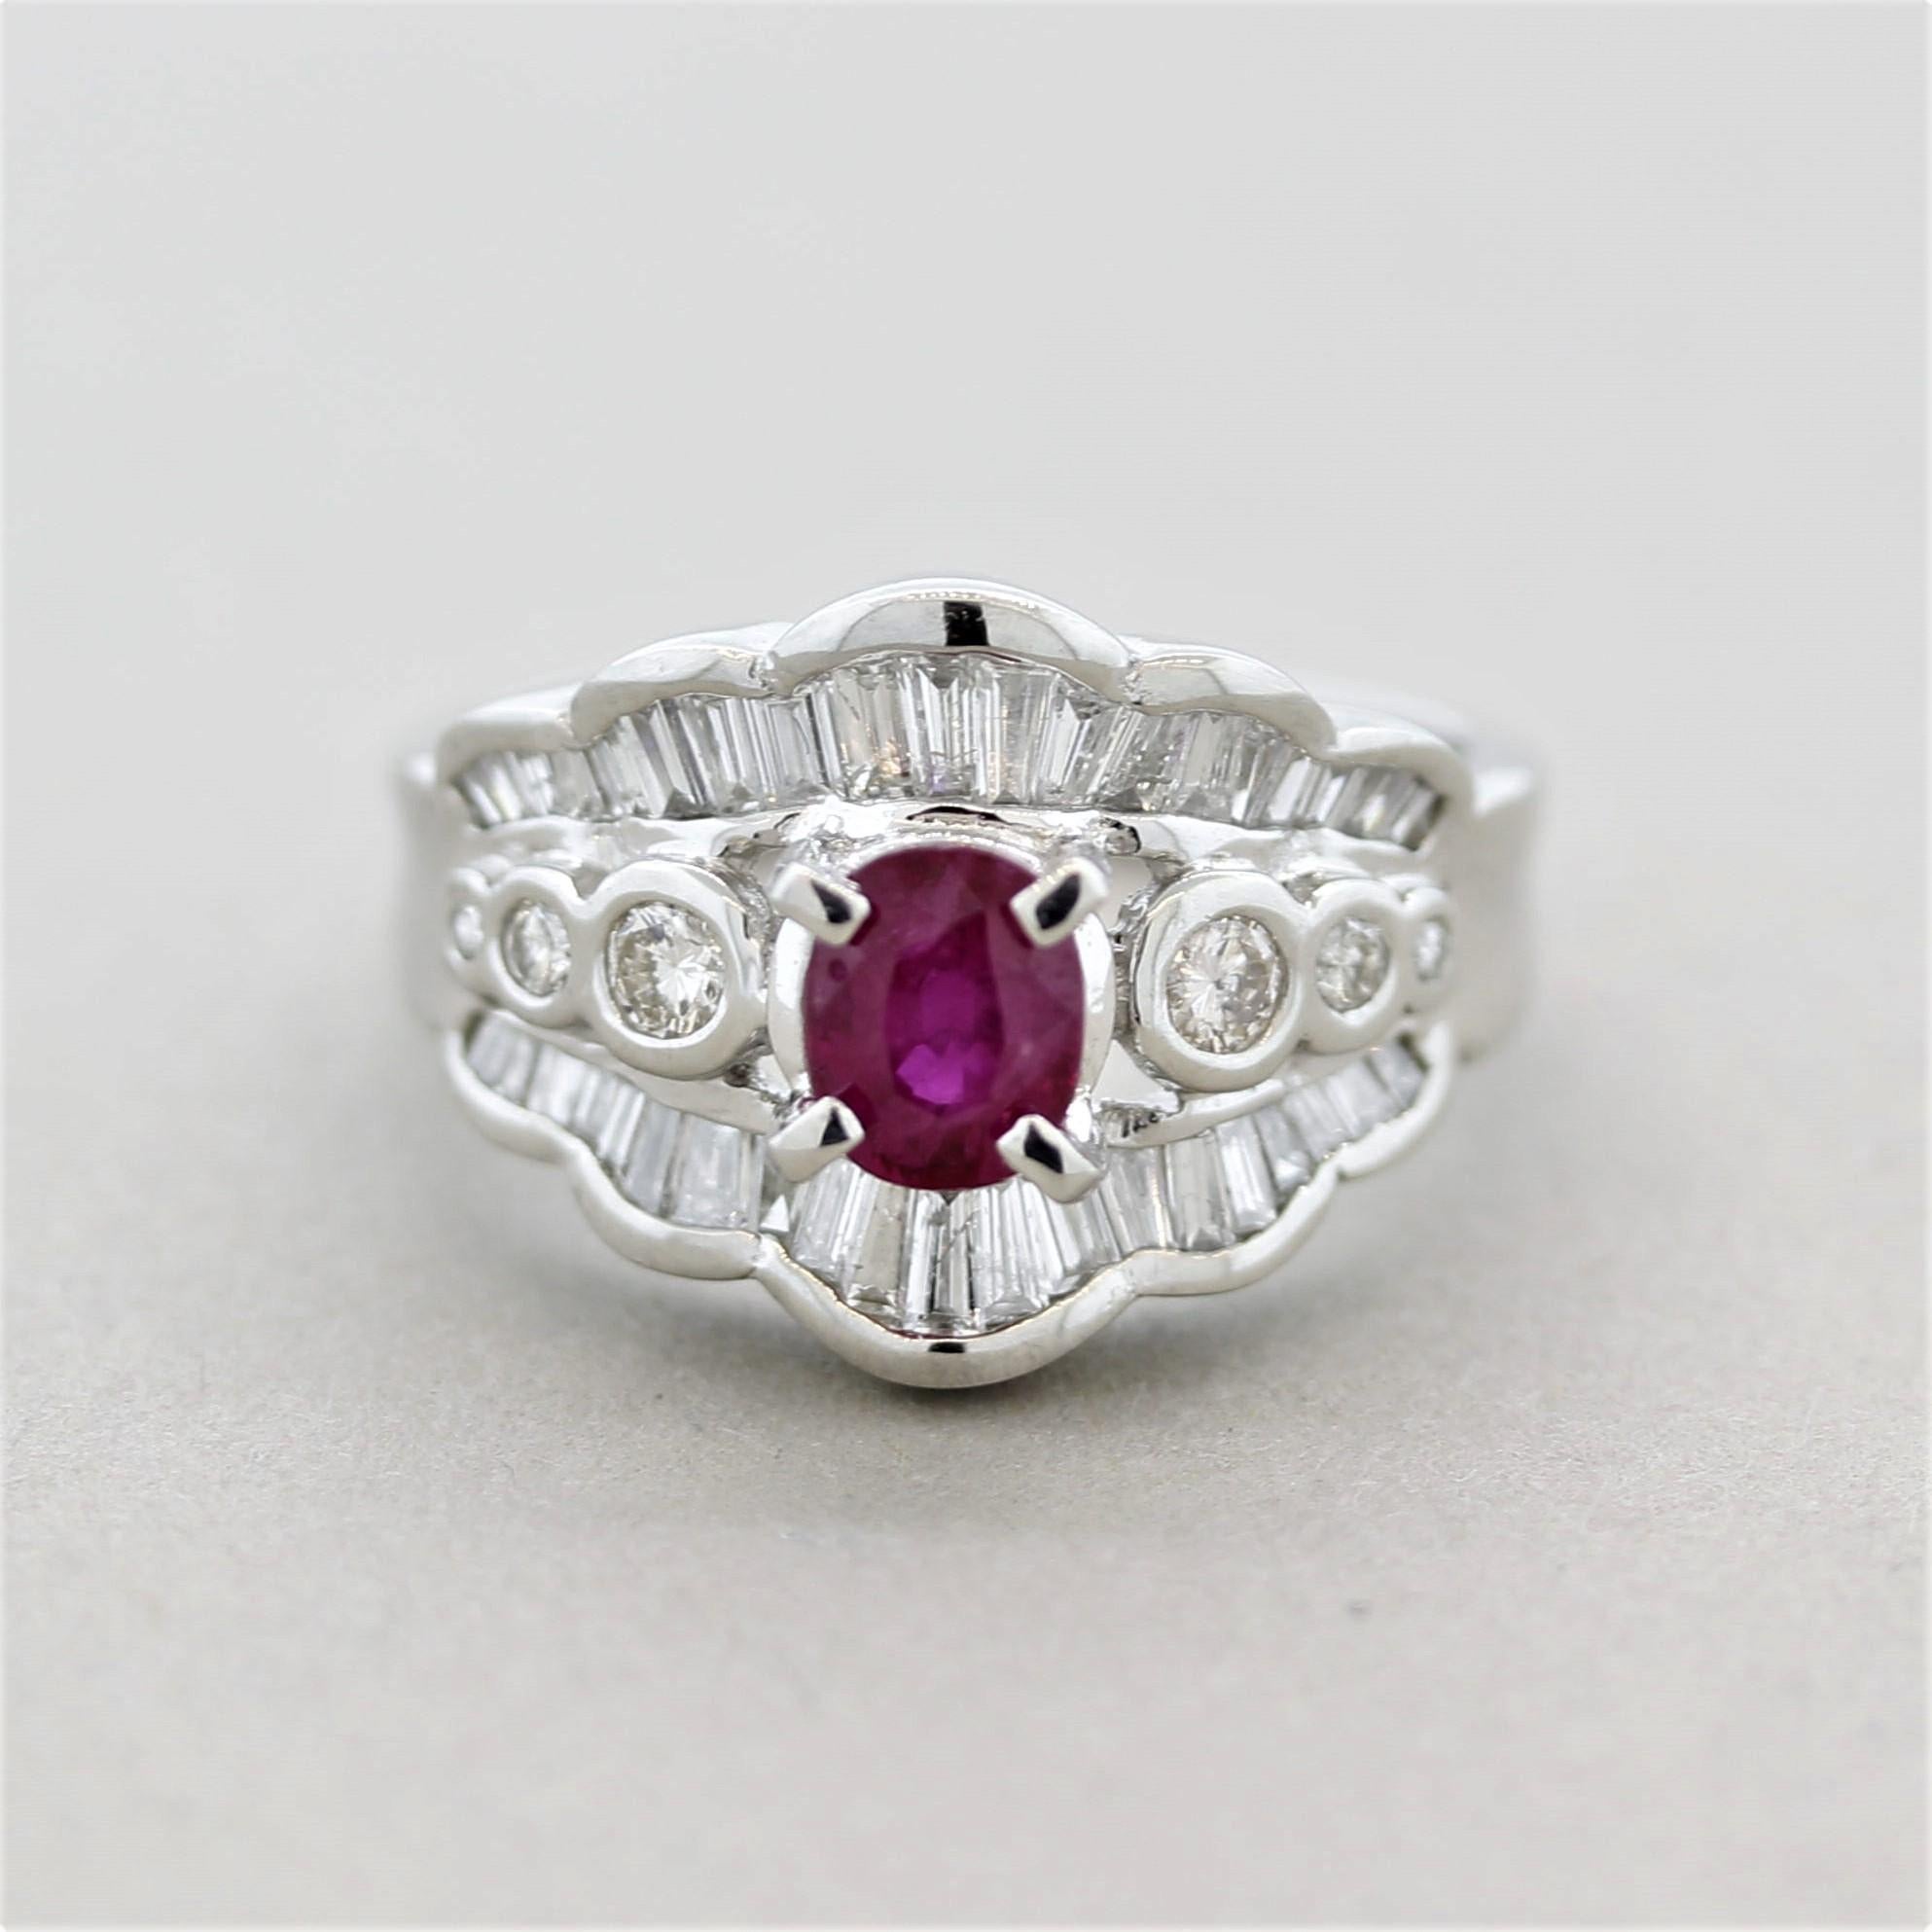 A chic and stylish ruby and diamond ring! It features a 0.80 carat oval-shaped ruby with a bright red color with excellent brilliance. It is accented by 0.85 carats of round brilliant-cut and baguette-cut diamonds set across the ring and around the